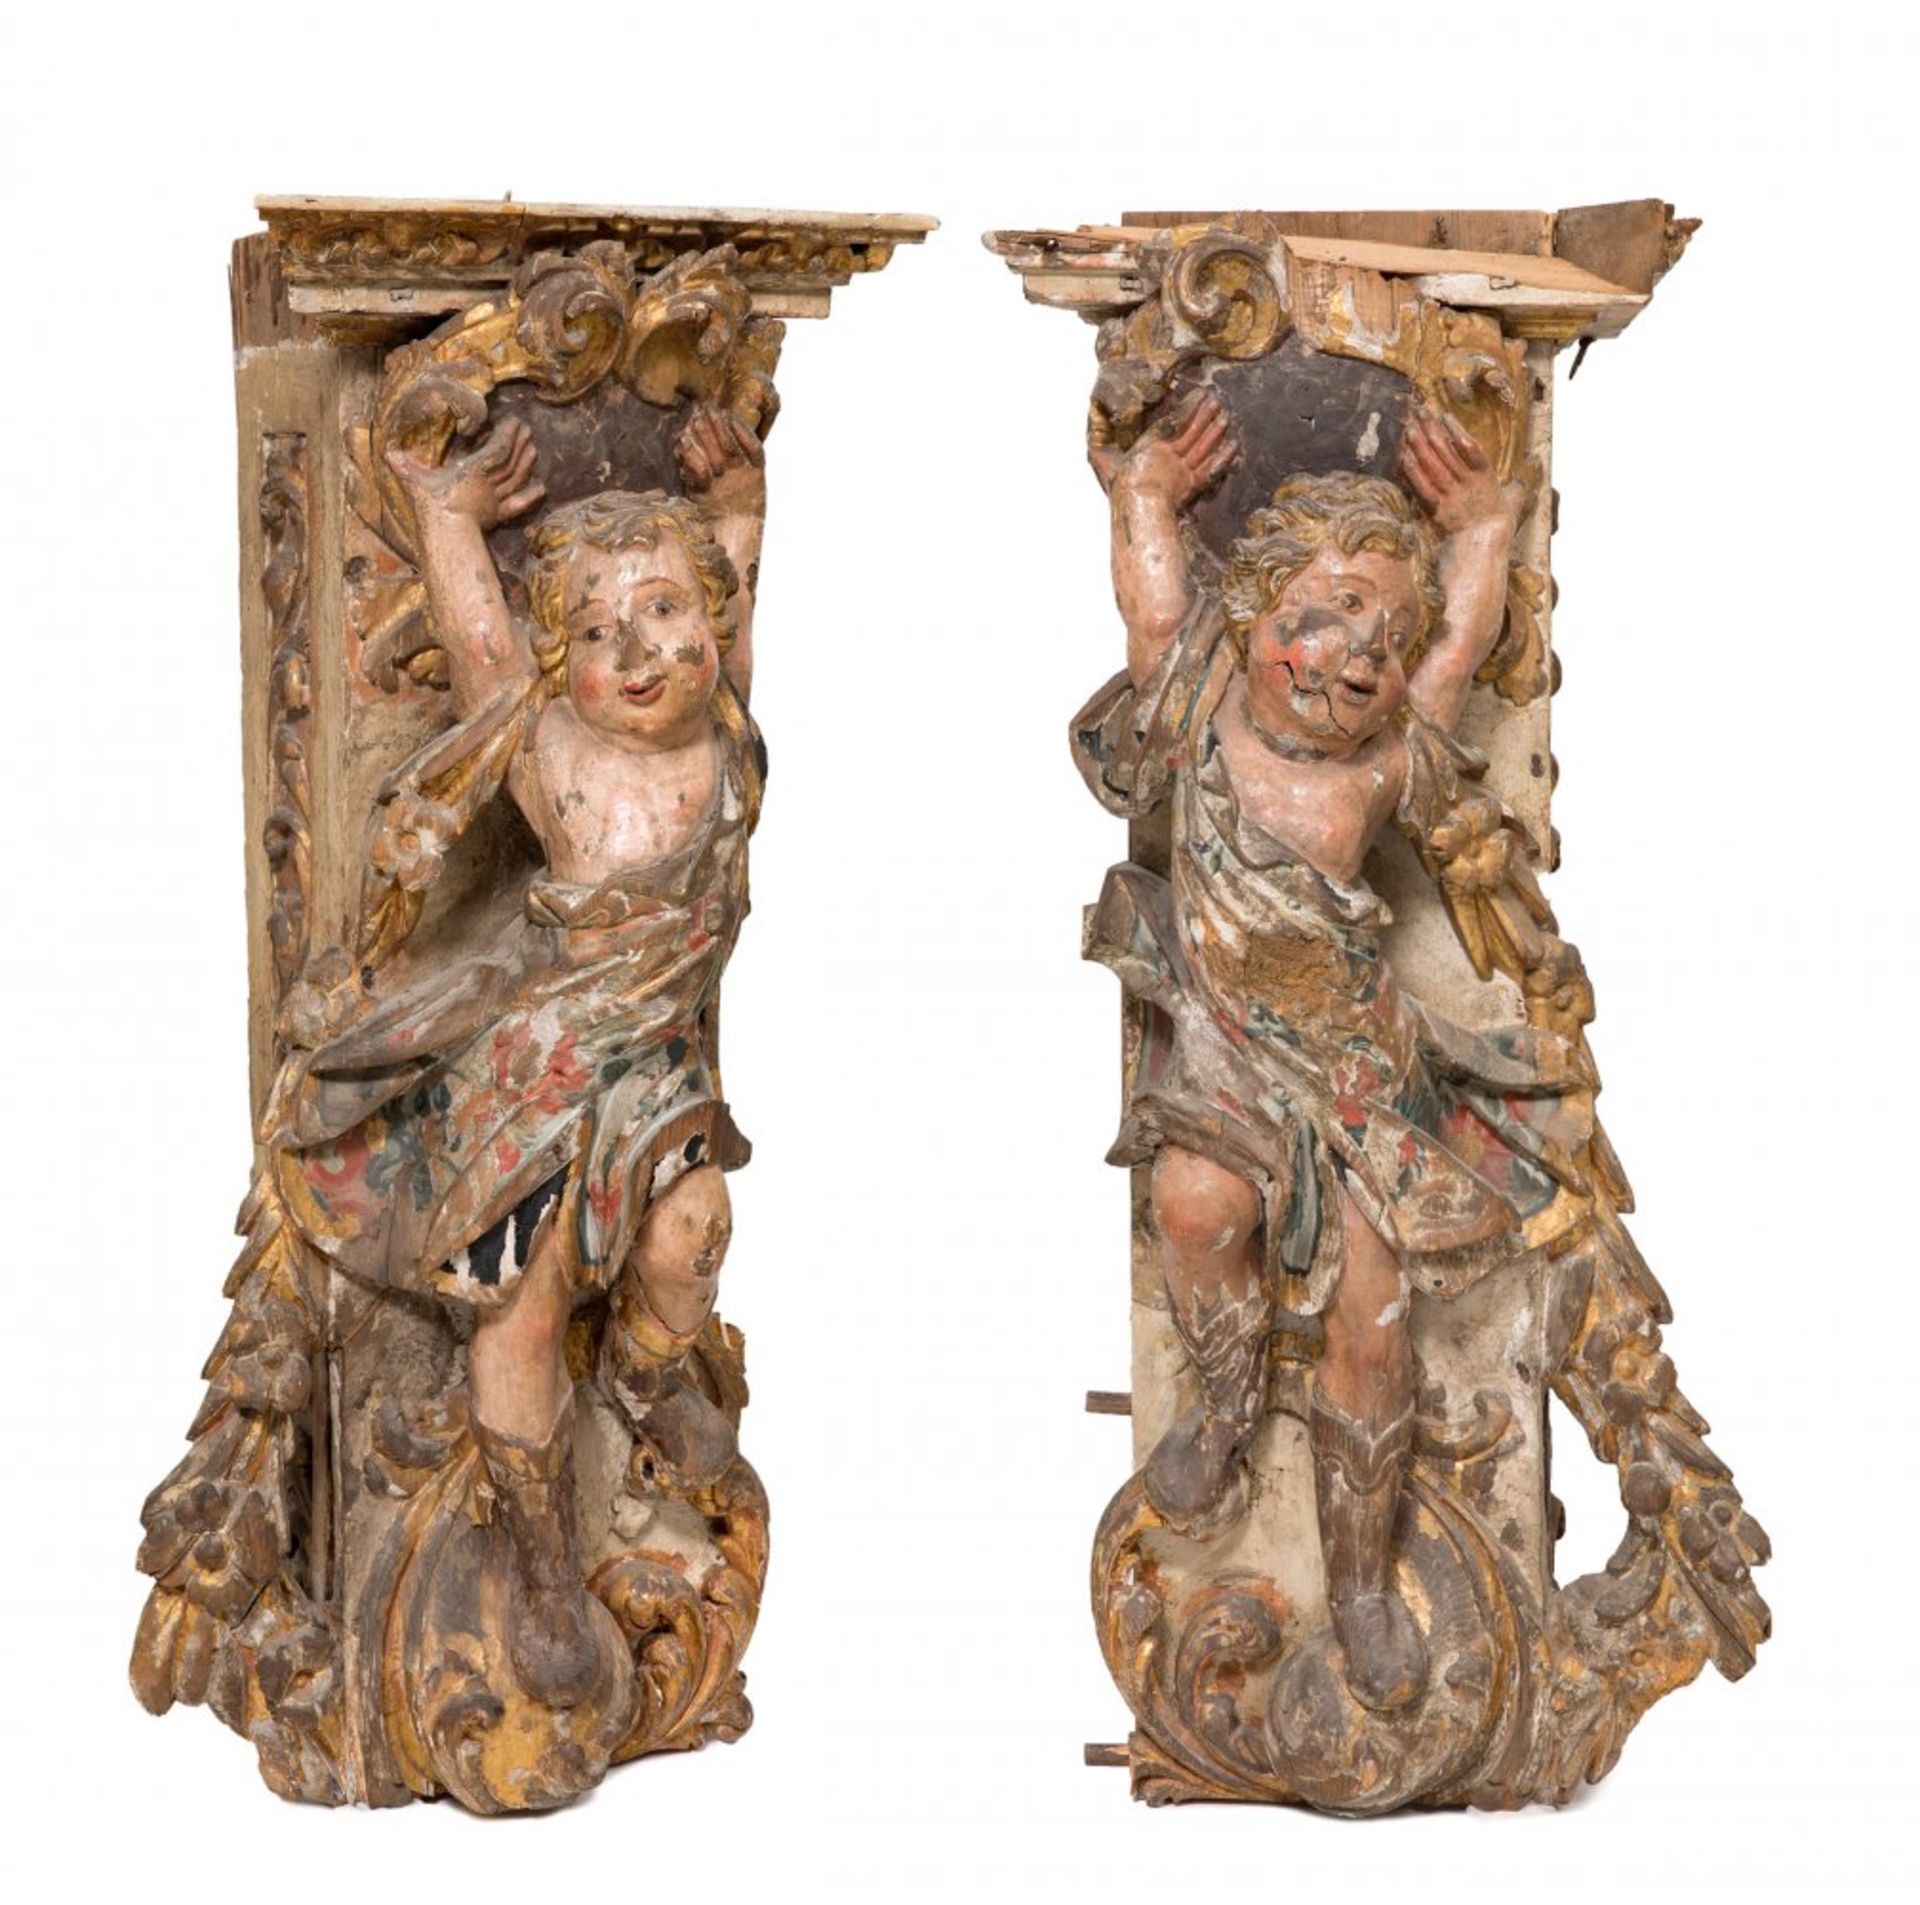 Early 18th century Spanish work.Pair of pilasters with angels.Carved, gilded and polychrome wood.